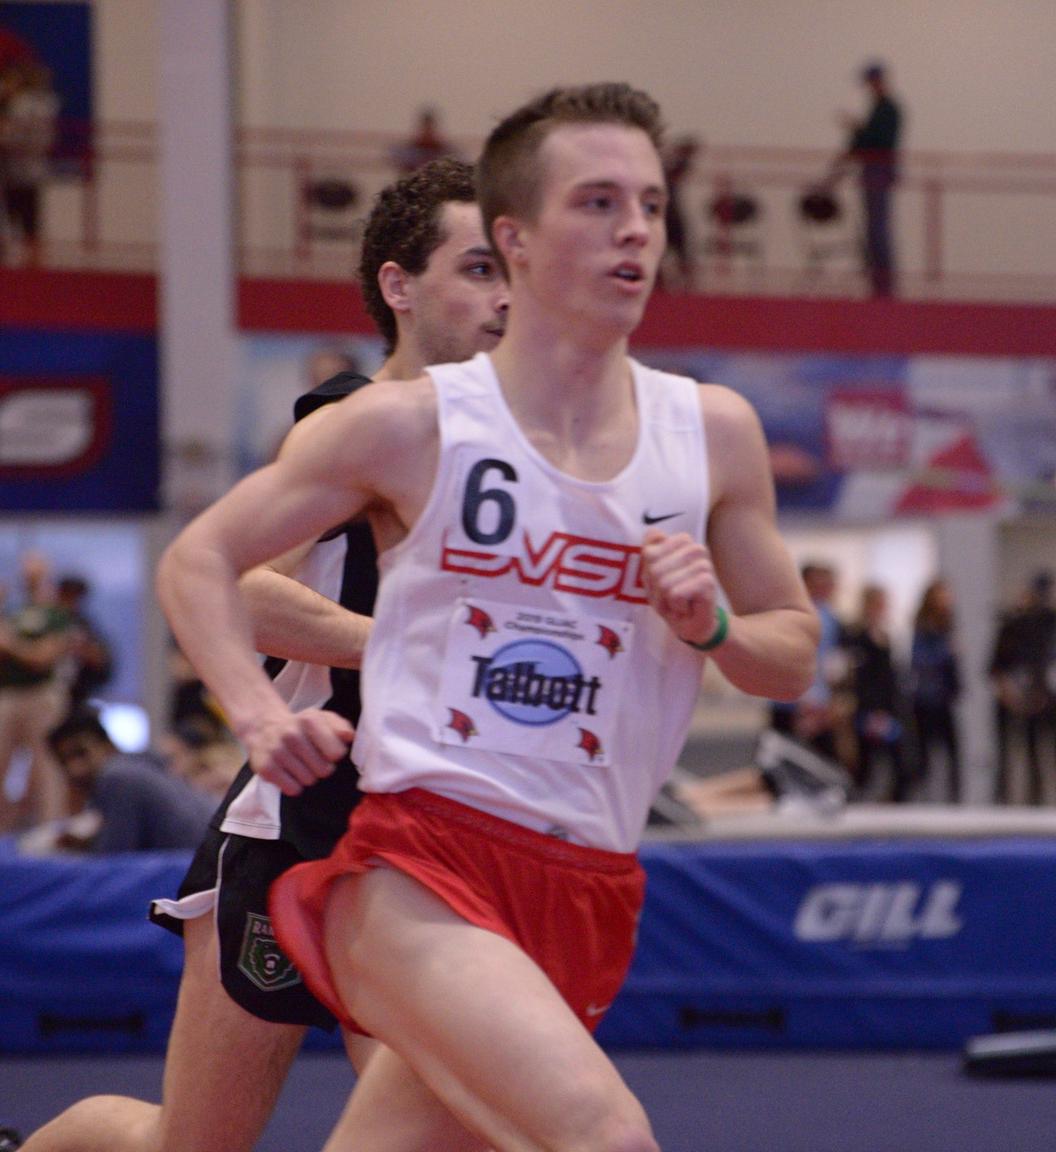 Cardinals continue to see success on the track